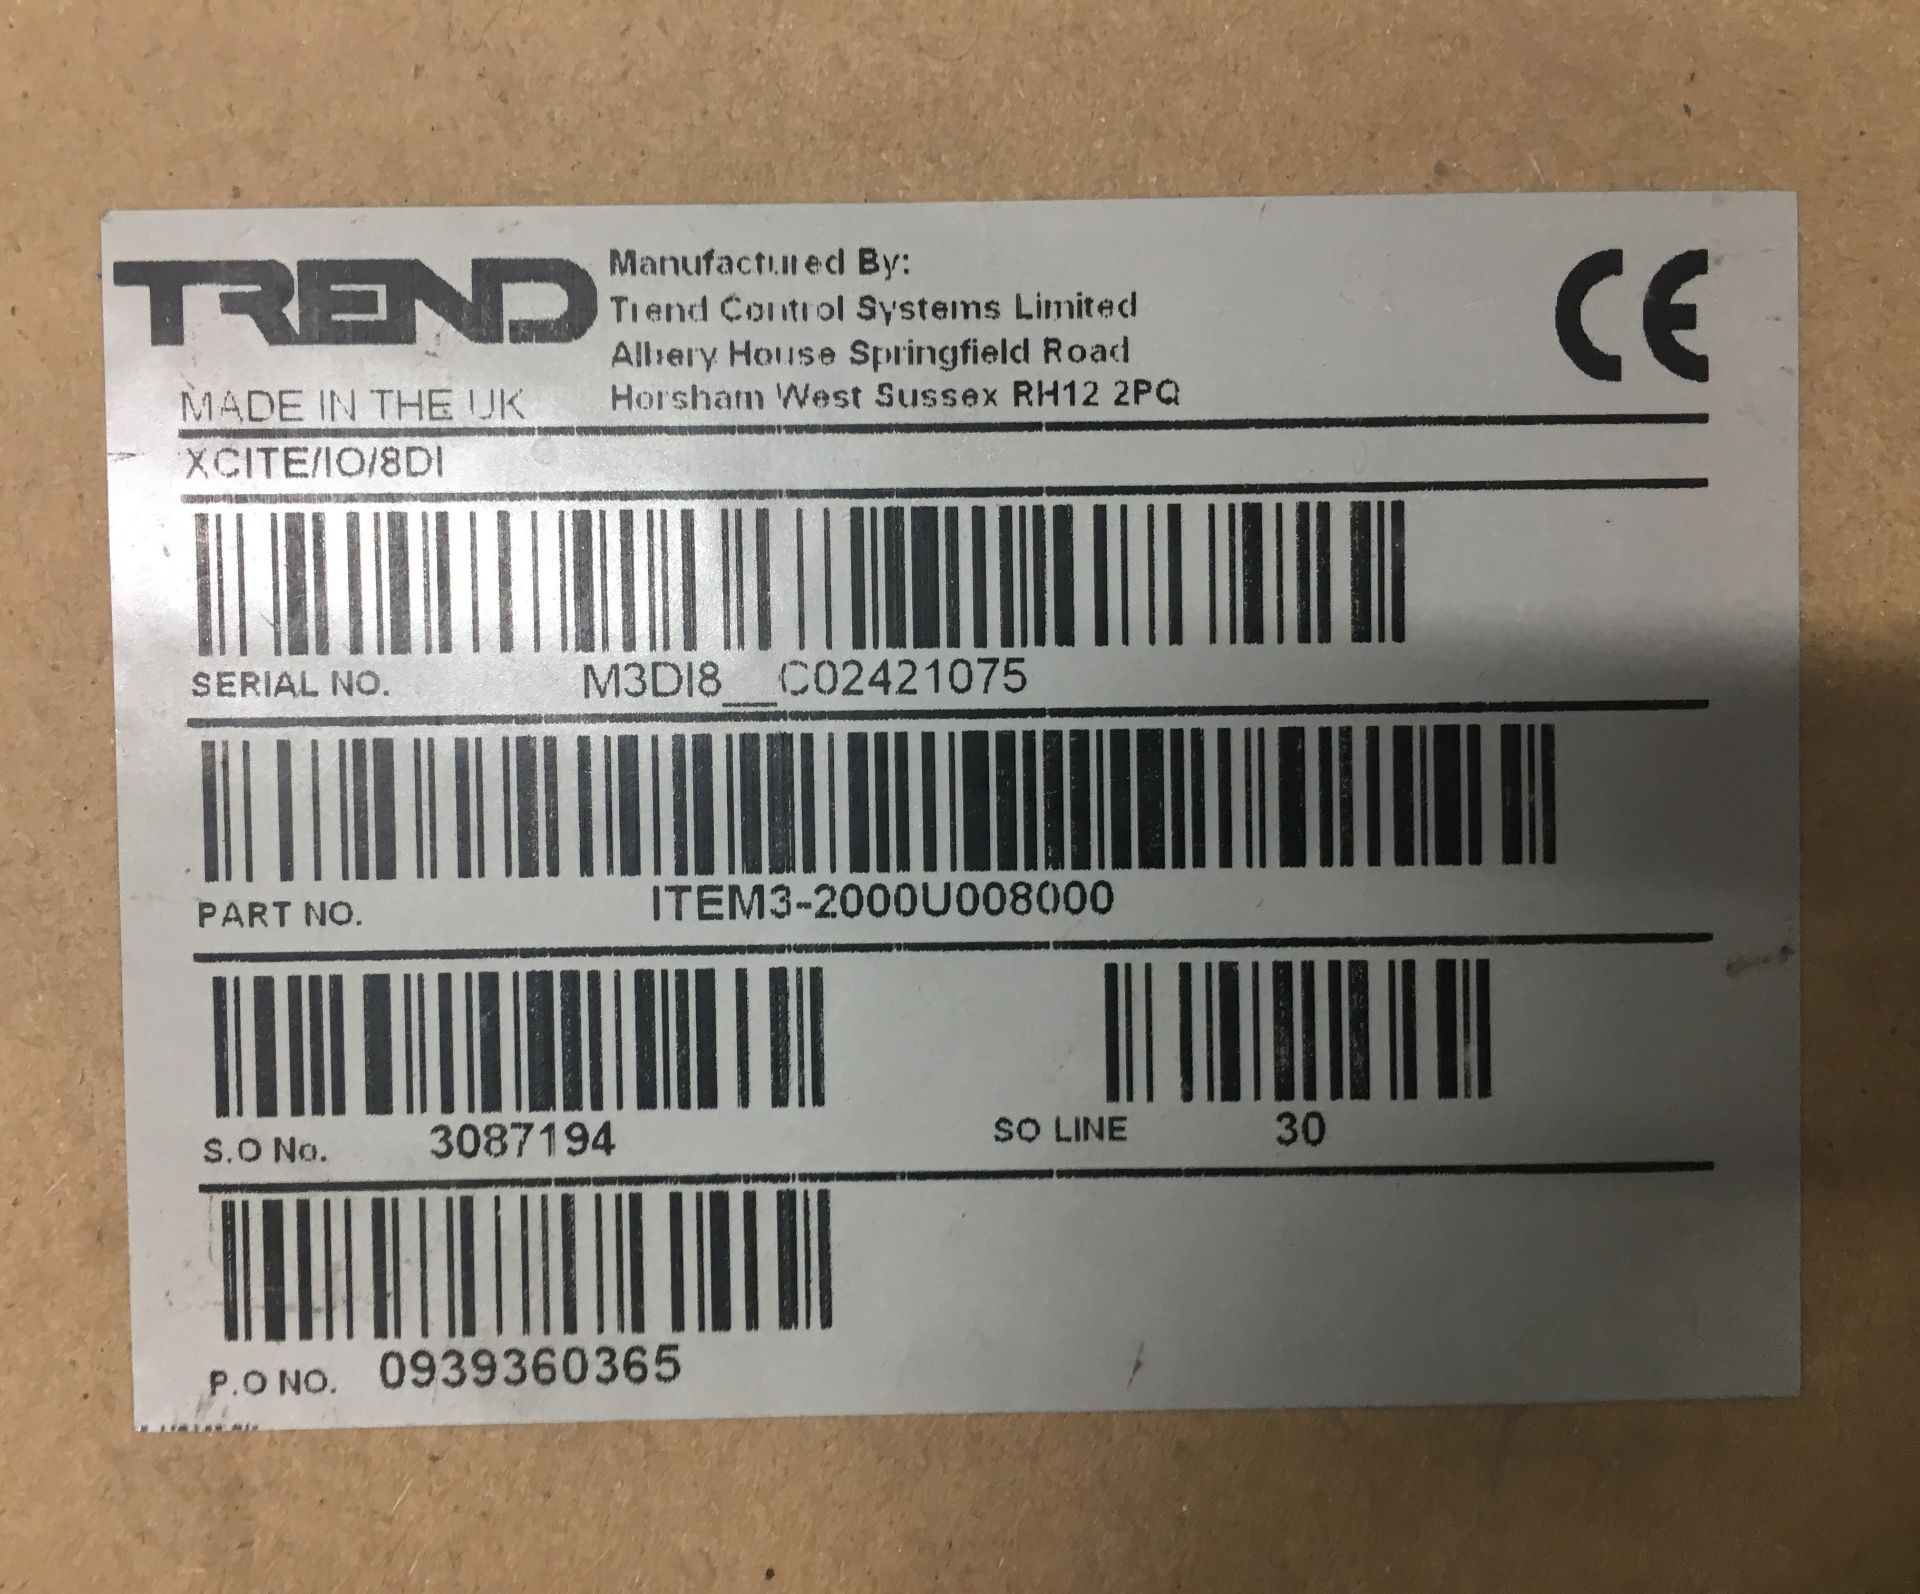 Trend Xcite/IO/8Di Web Enabled Controller - £80.00 - Image 2 of 2